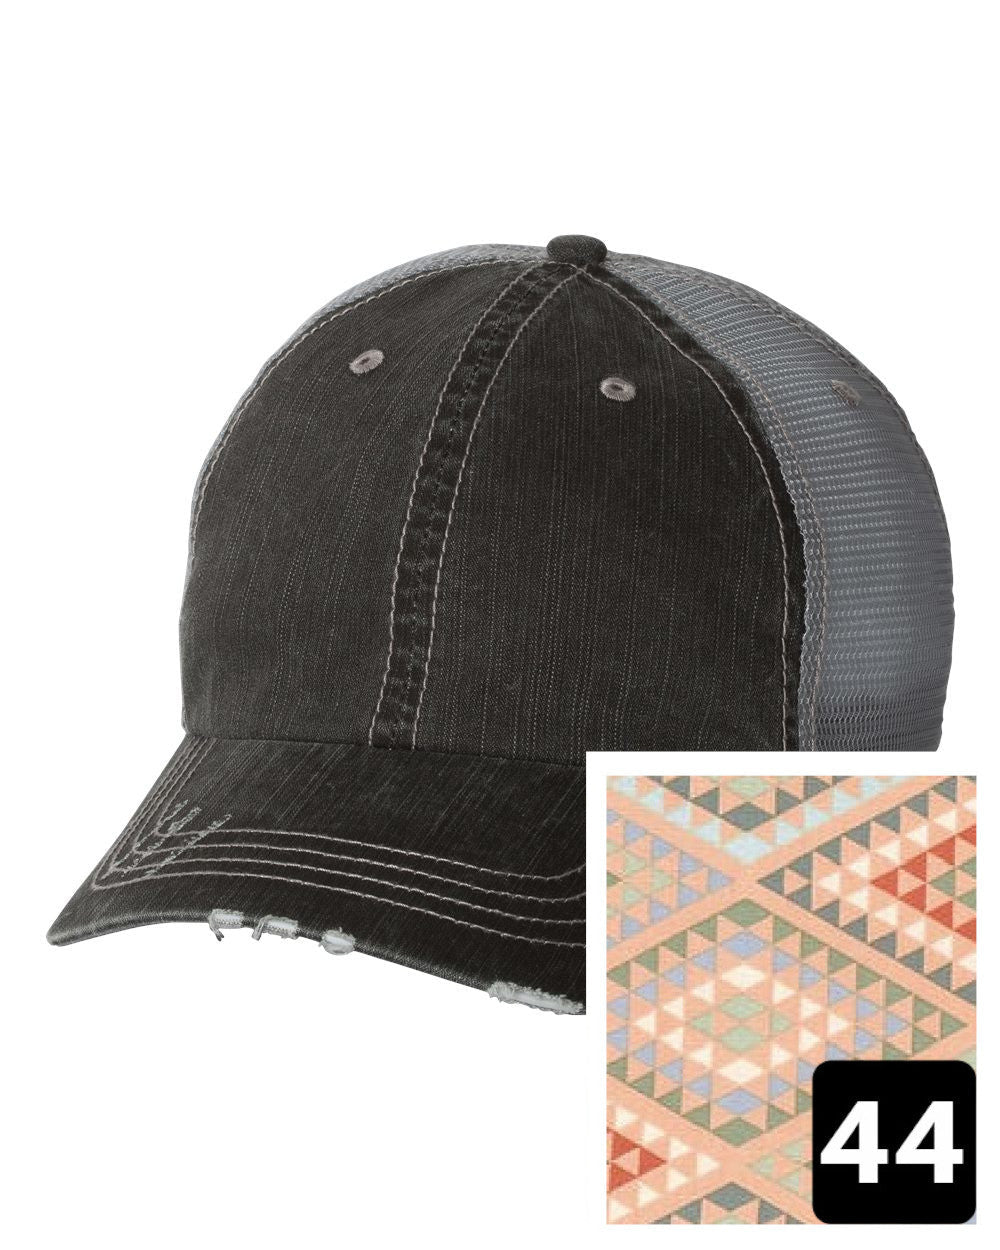 gray distressed trucker hat with navy coral and white chevron fabric state of Montana